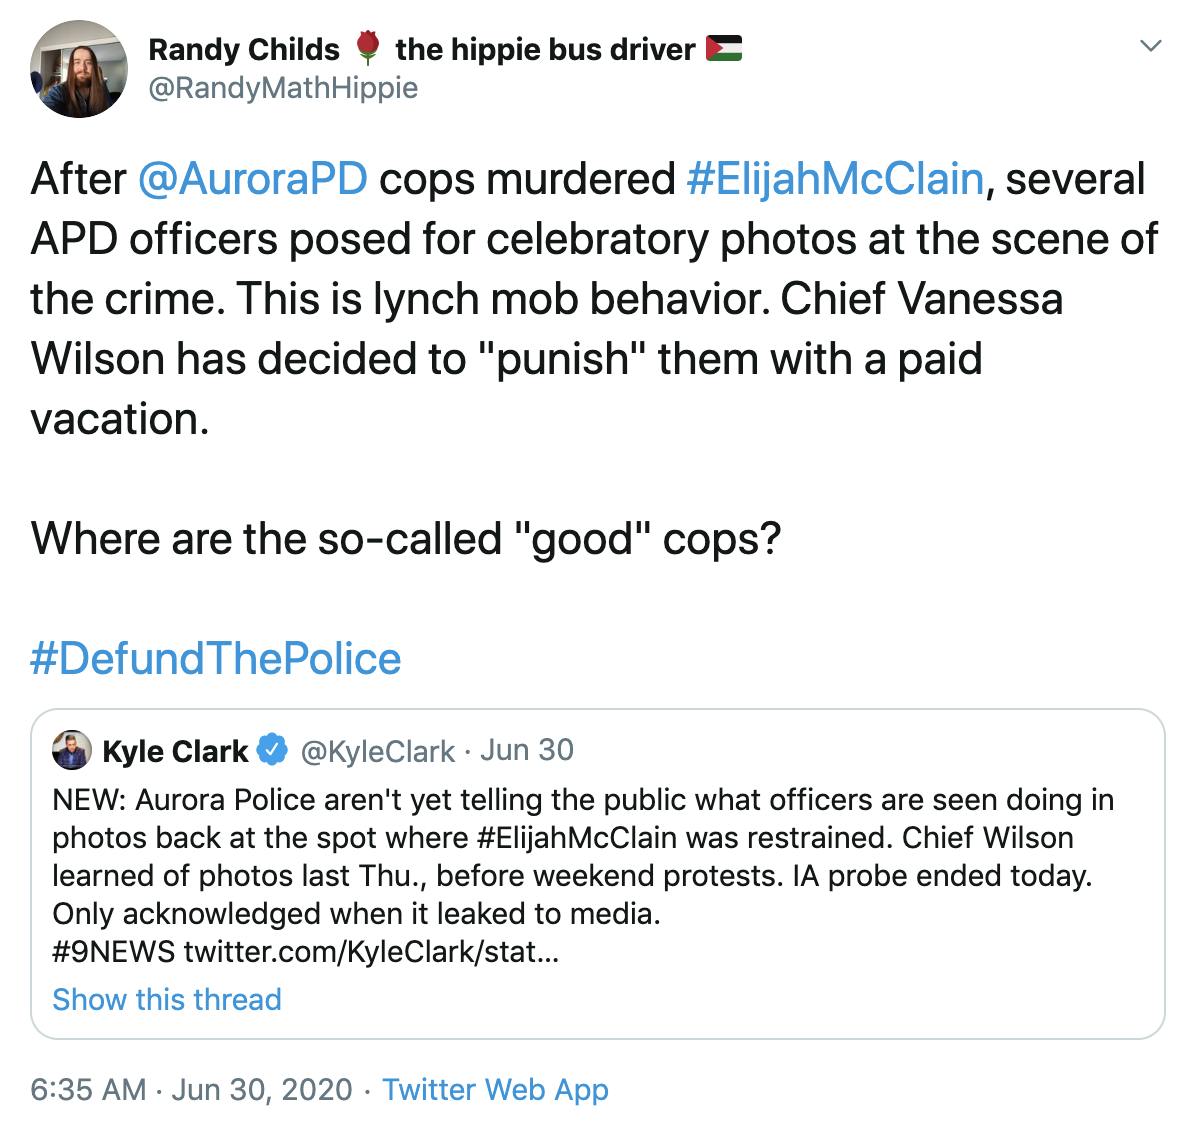 After  @AuroraPD  cops murdered #ElijahMcClain, several APD officers posed for celebratory photos at the scene of the crime. This is lynch mob behavior. Chief Vanessa Wilson has decided to "punish" them with a paid vacation.  Where are the so-called "good" cops?